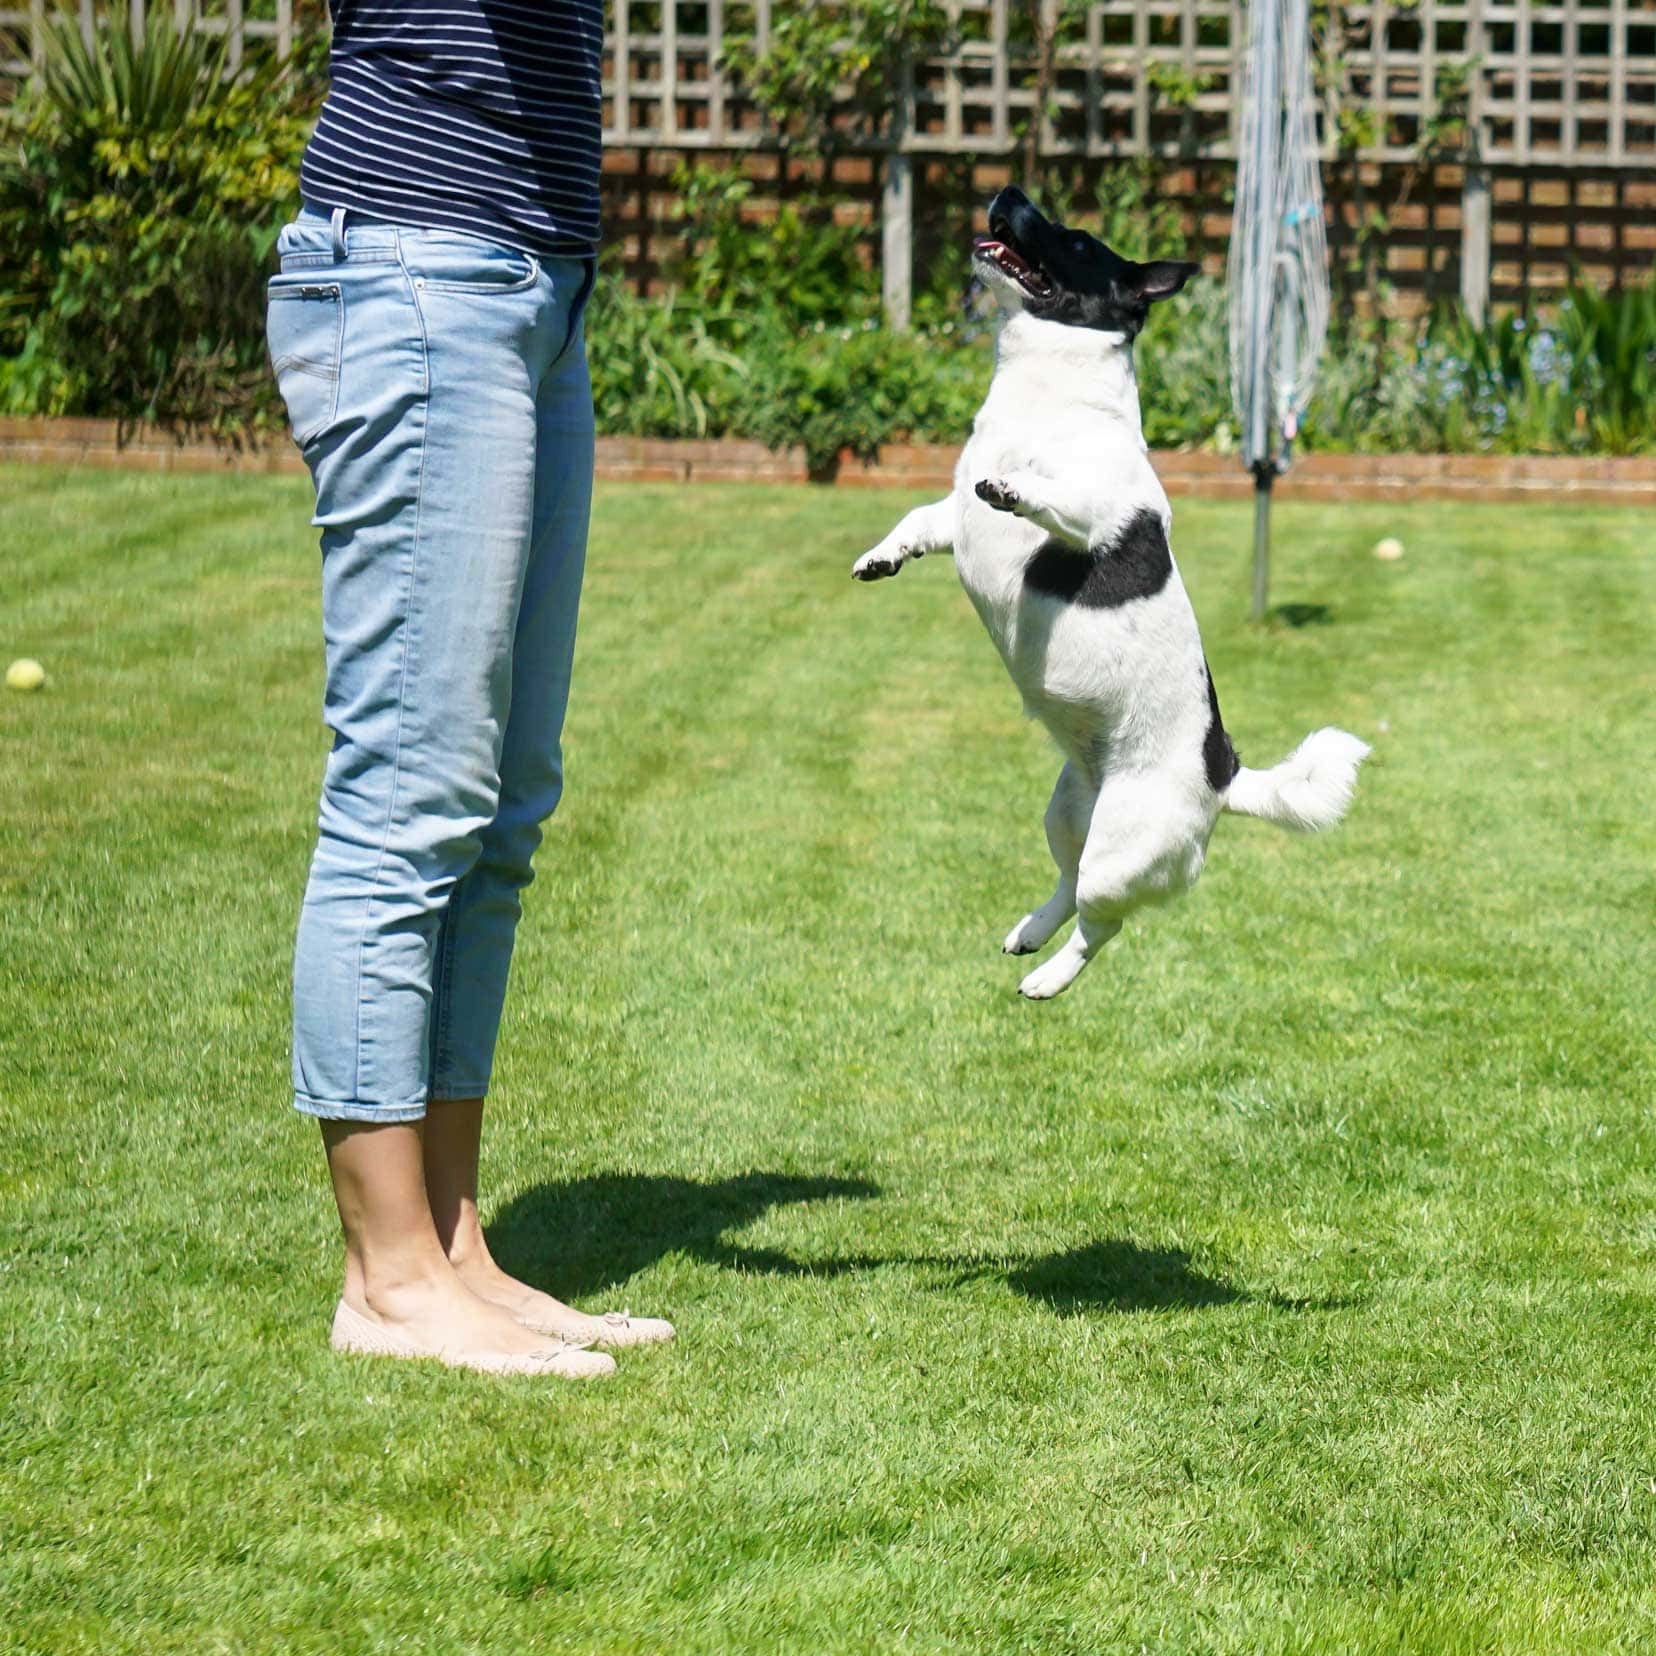 Shelley's legs in jeans with a smal black and white dog jumping high with its nose reaching past her waist - house sitting in UK